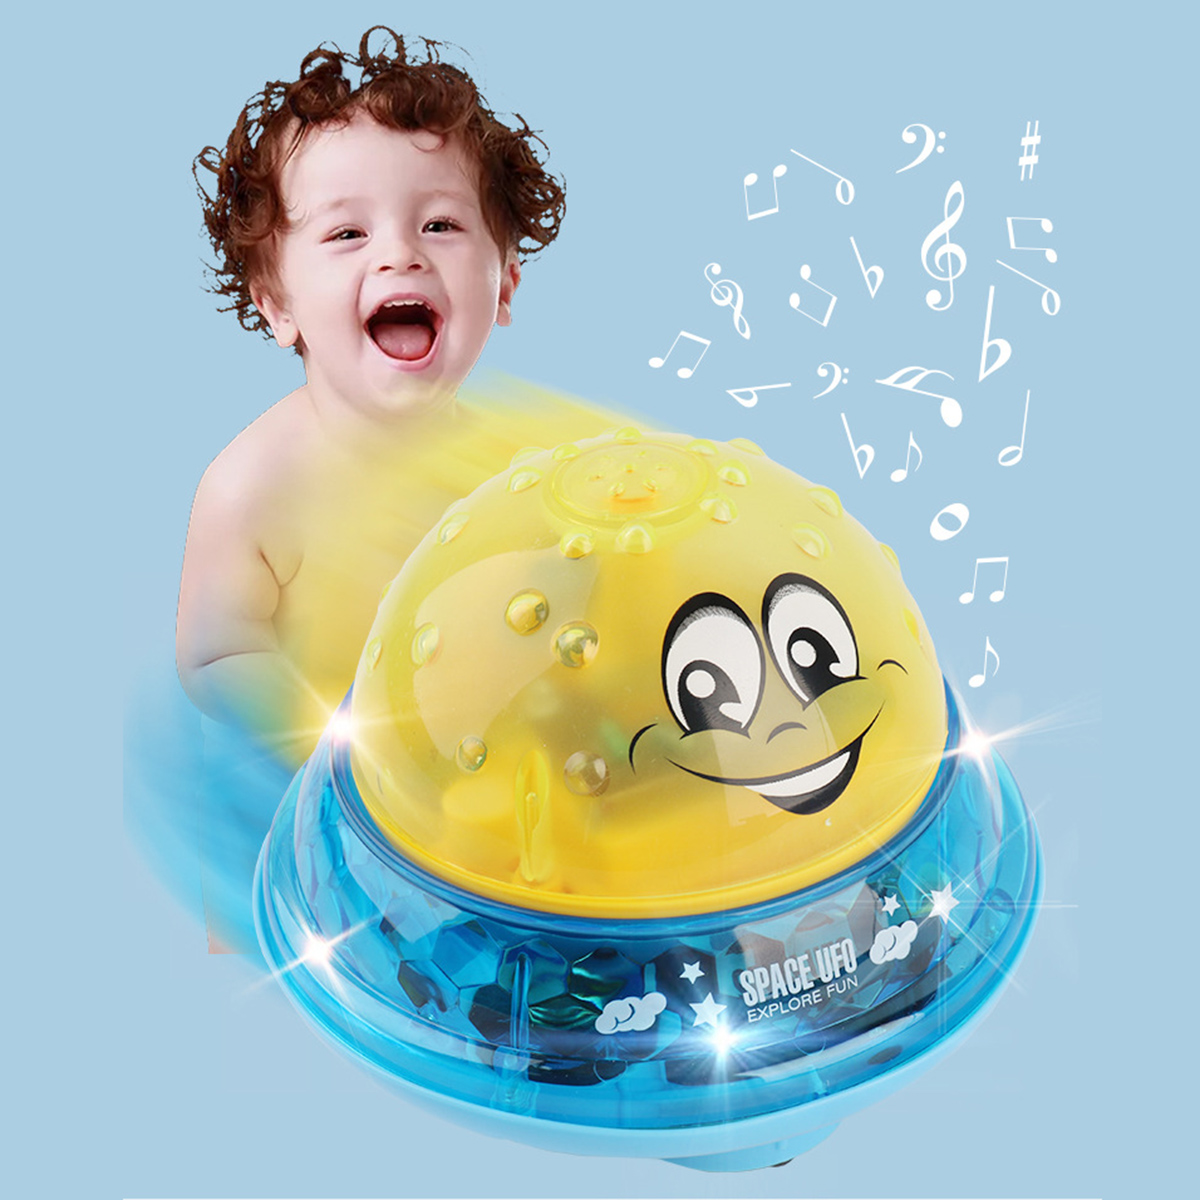 Infant-Childrens-Electric-Induction-Water-Spray-Toy-Bath-Light-Music-Rotate-Toy-1800447-2